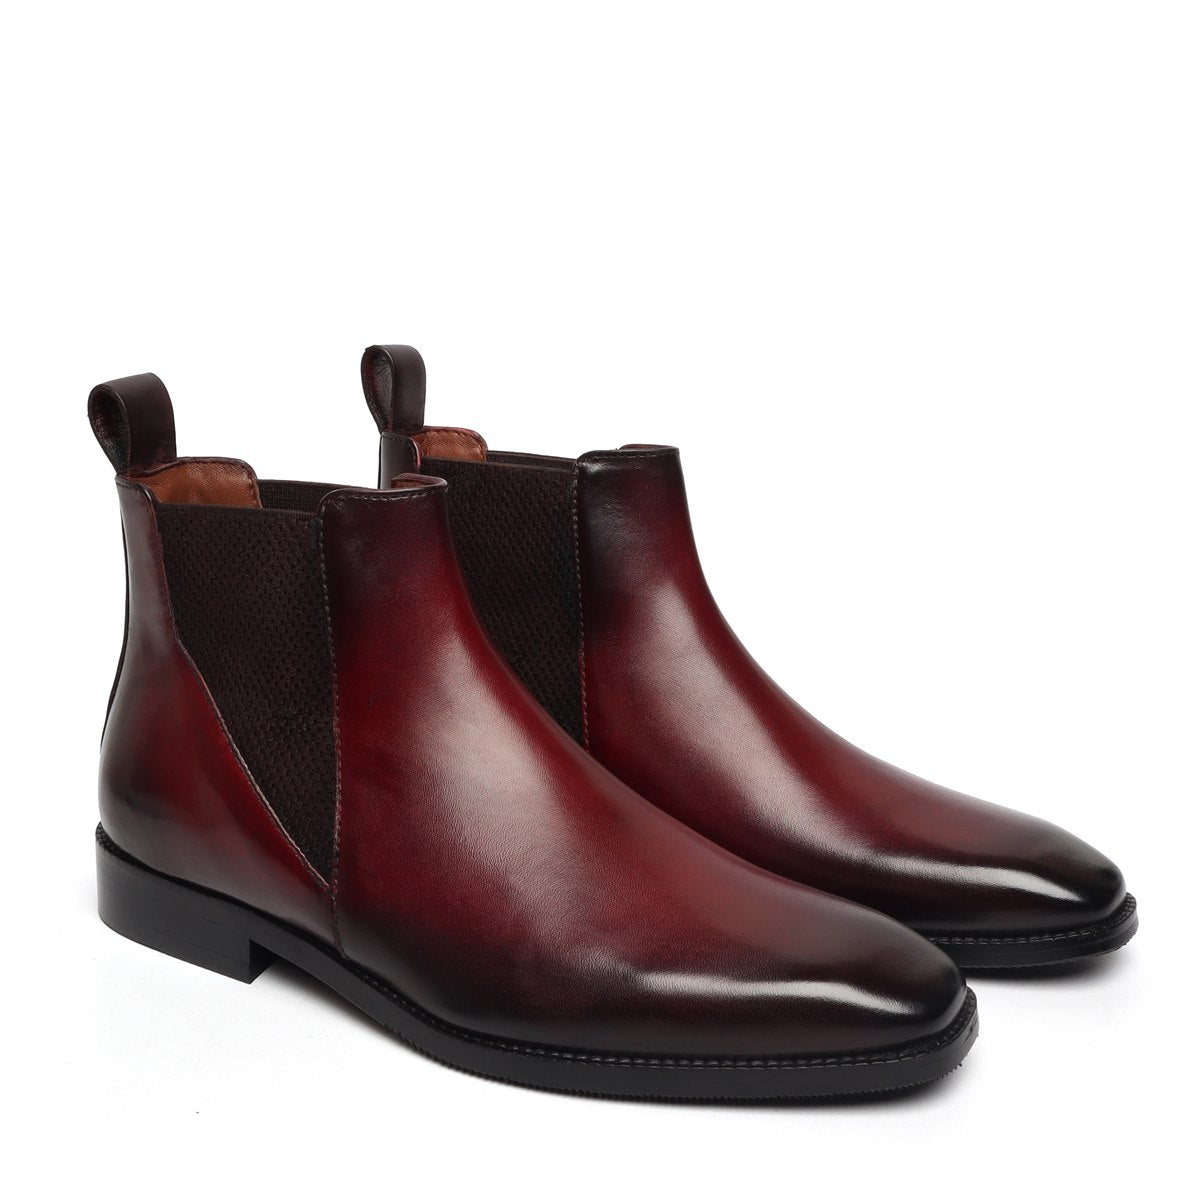 New shape Wine Leather Chelsea Boot by Brune & Bareskin with a Stylish Sharp Elastic Design